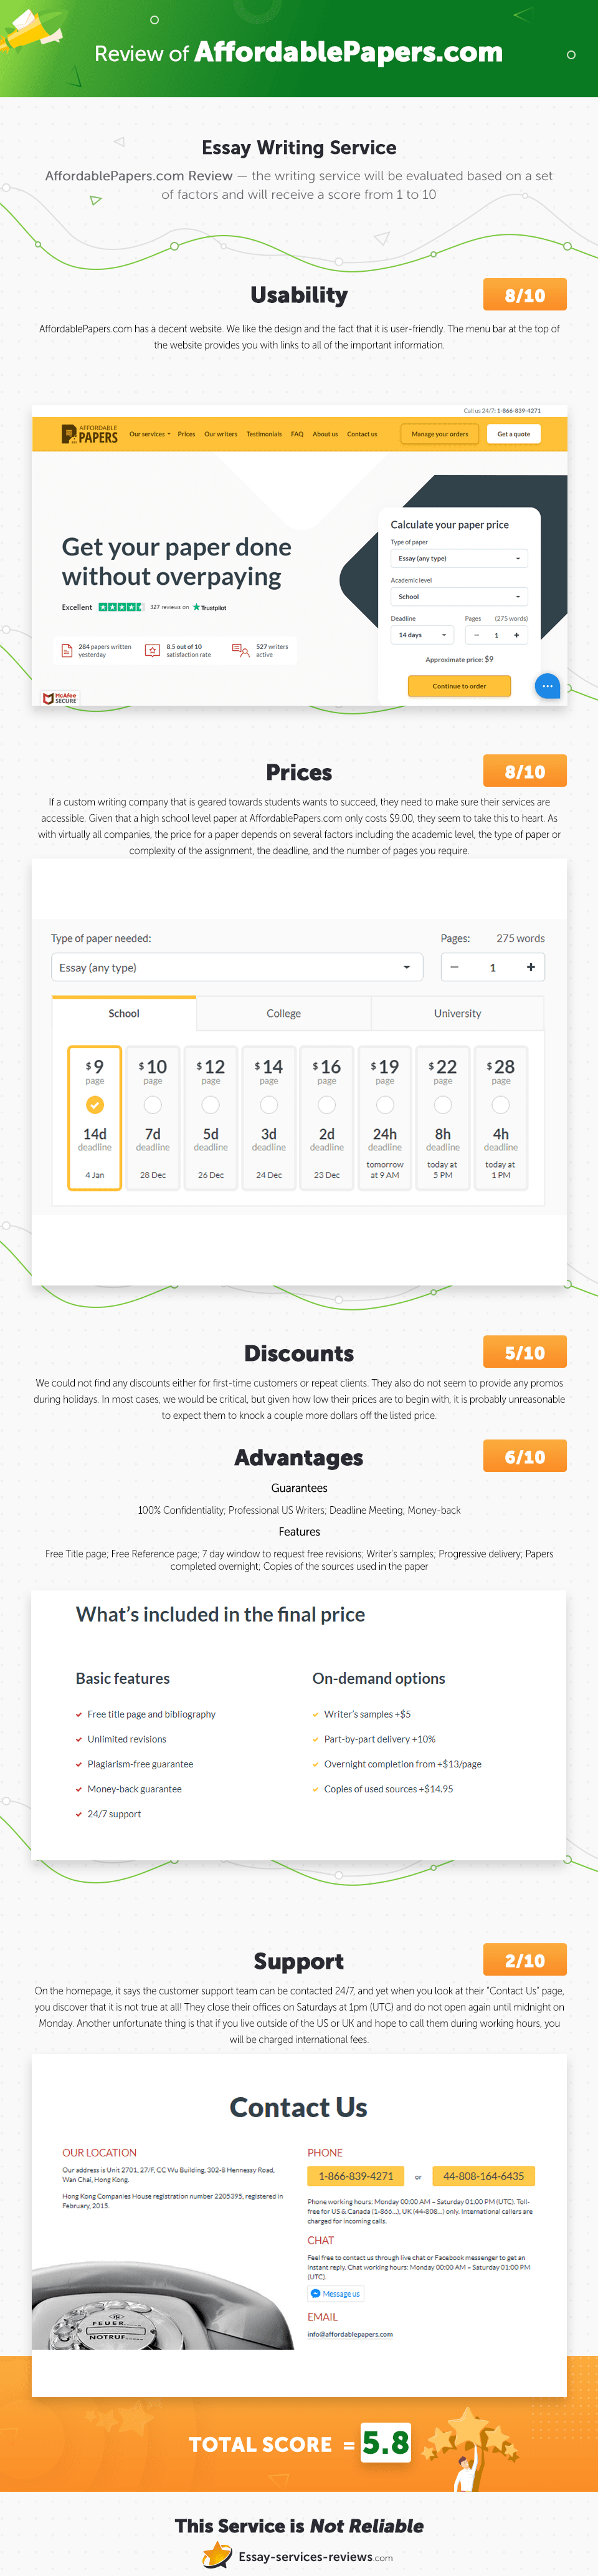 affordablepapers.com Infographic Review